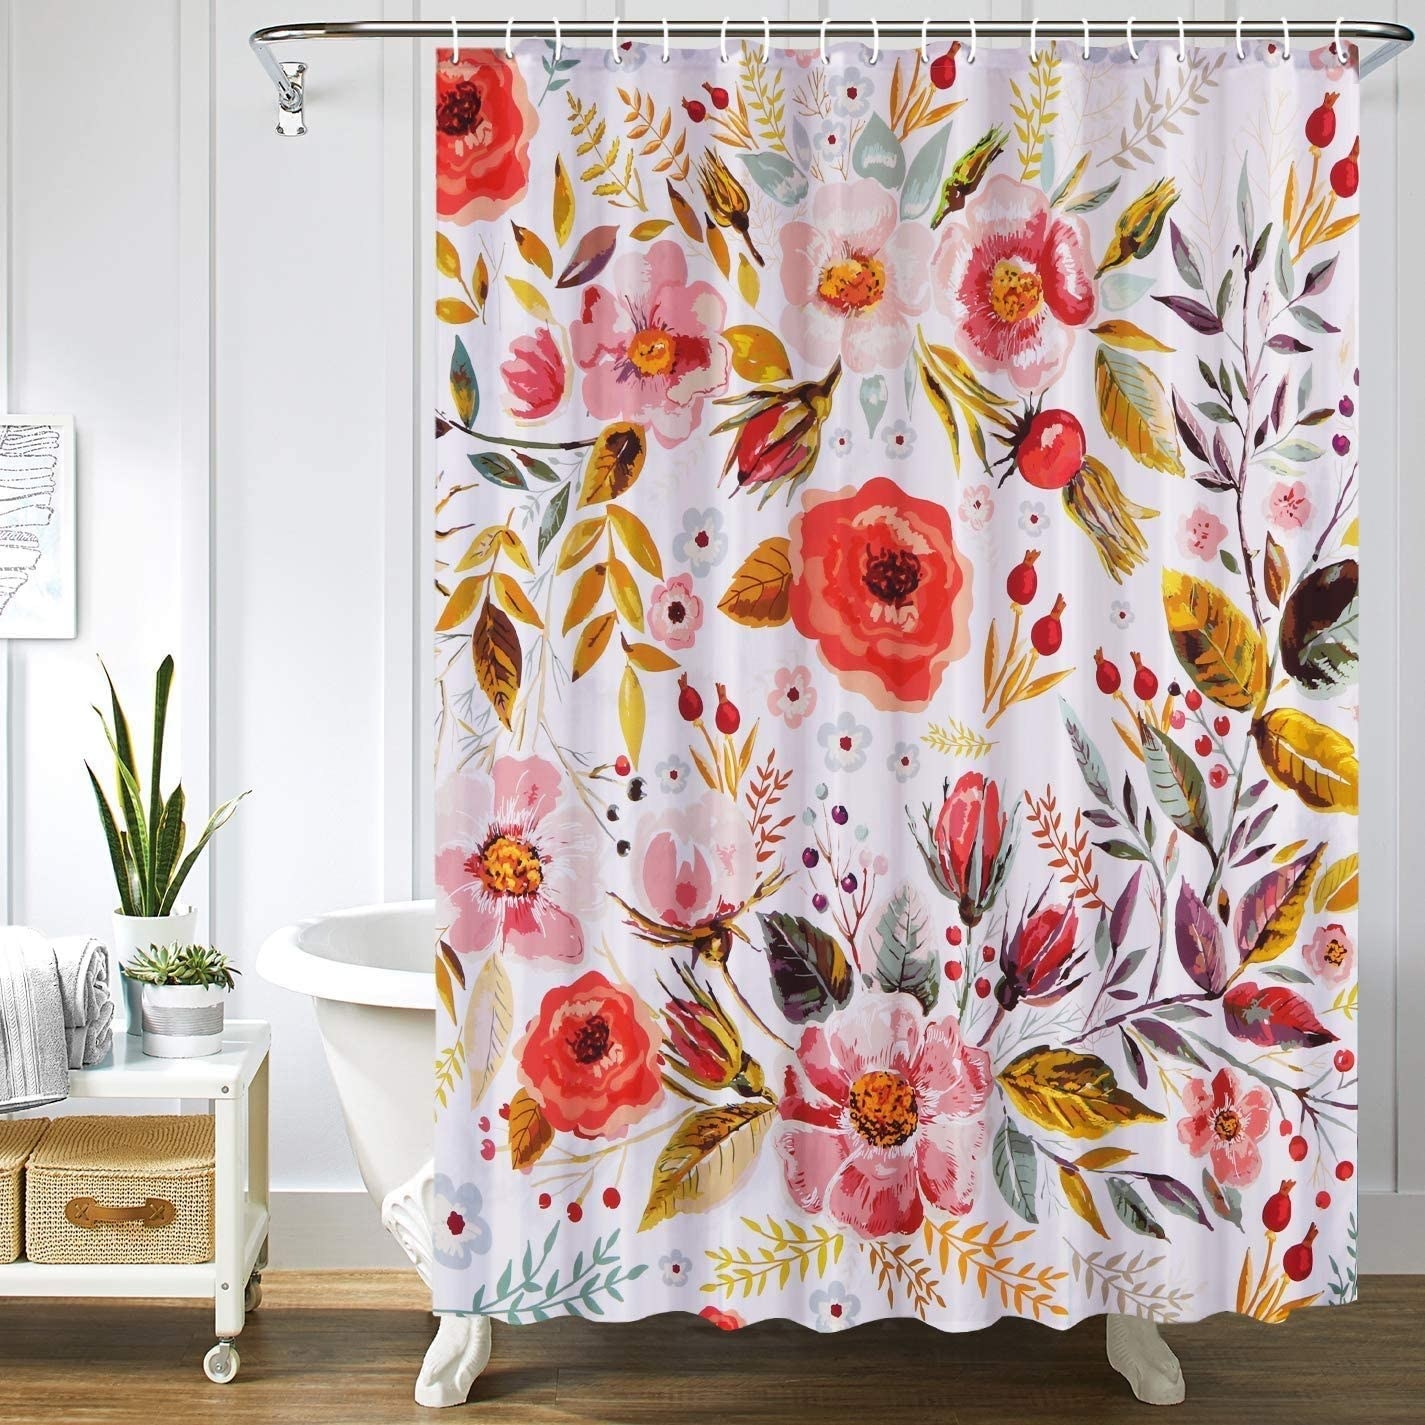 The shower curtain in front of a bathtub